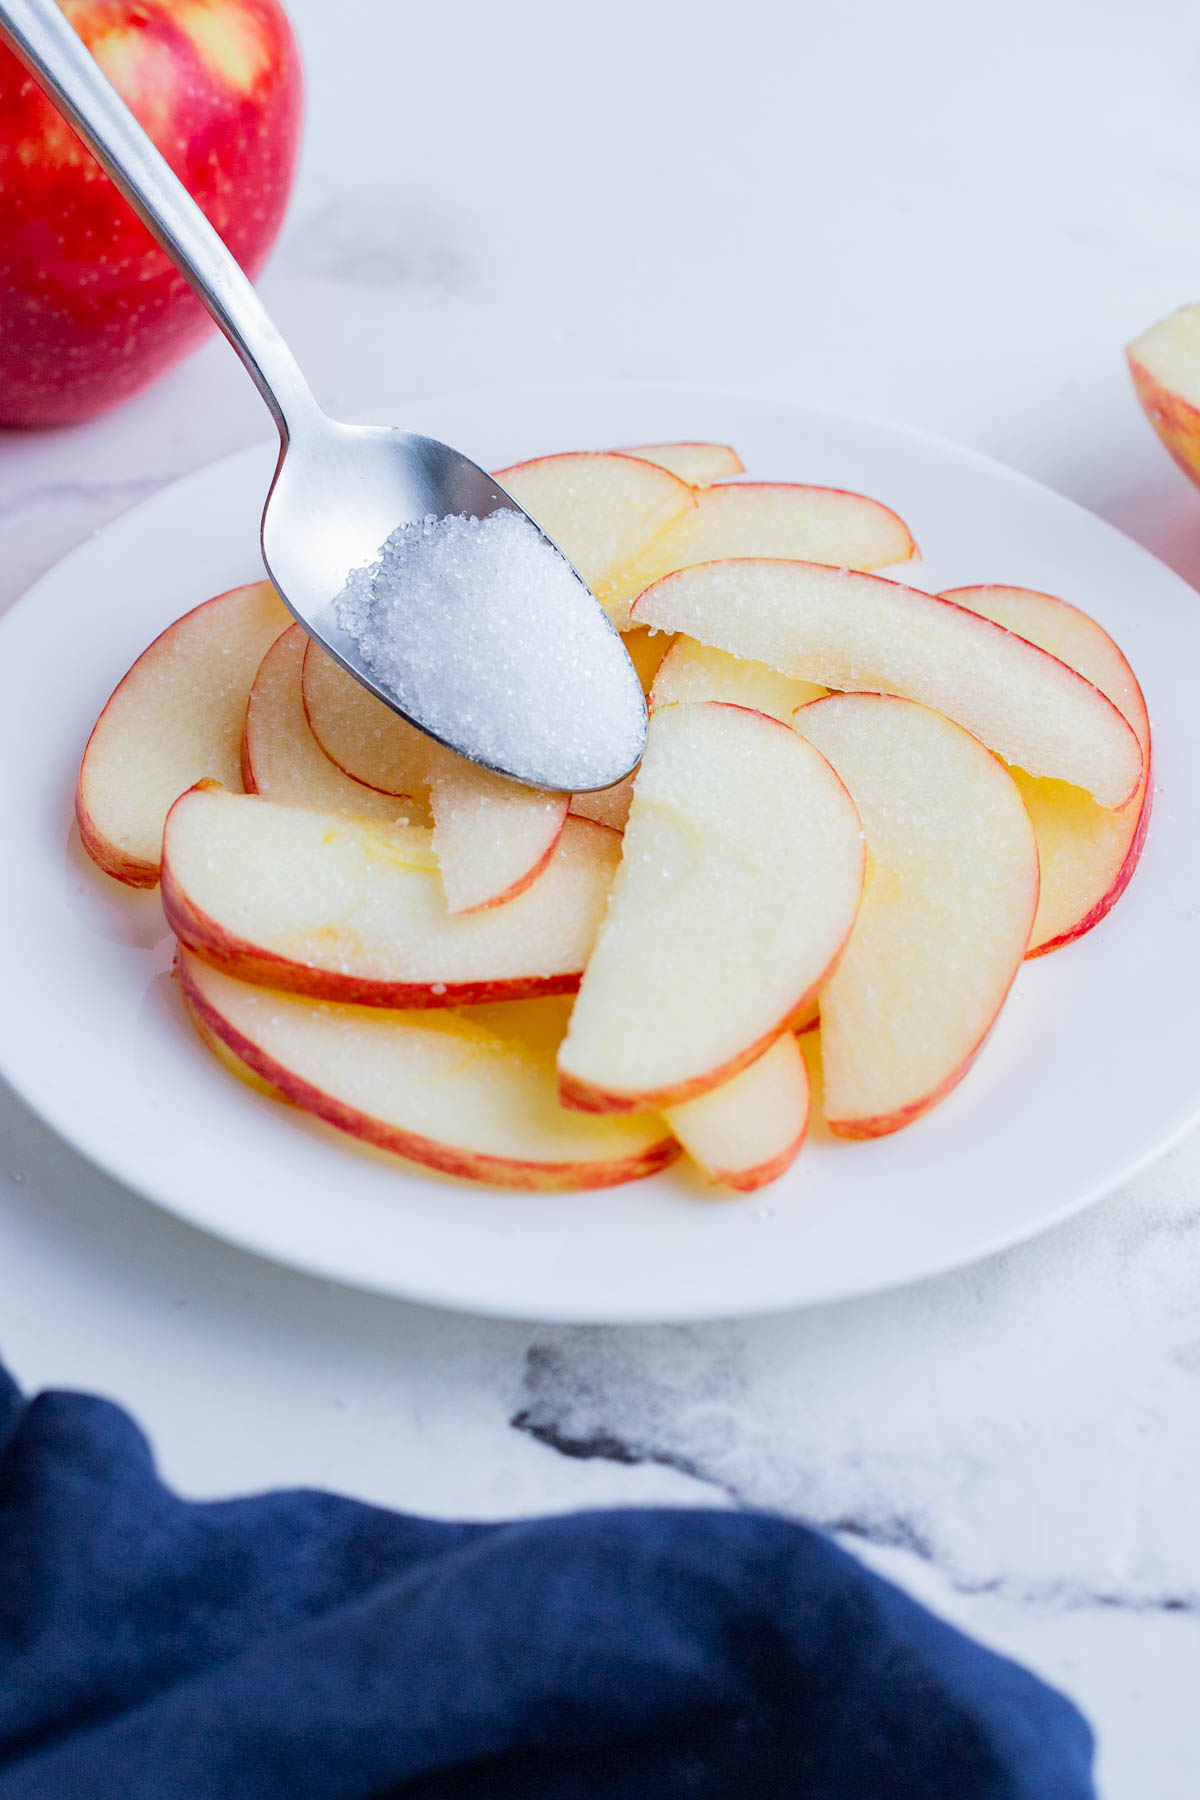 Citric acid being sprinkled with a spoon over thinly sliced apples on a white plate.